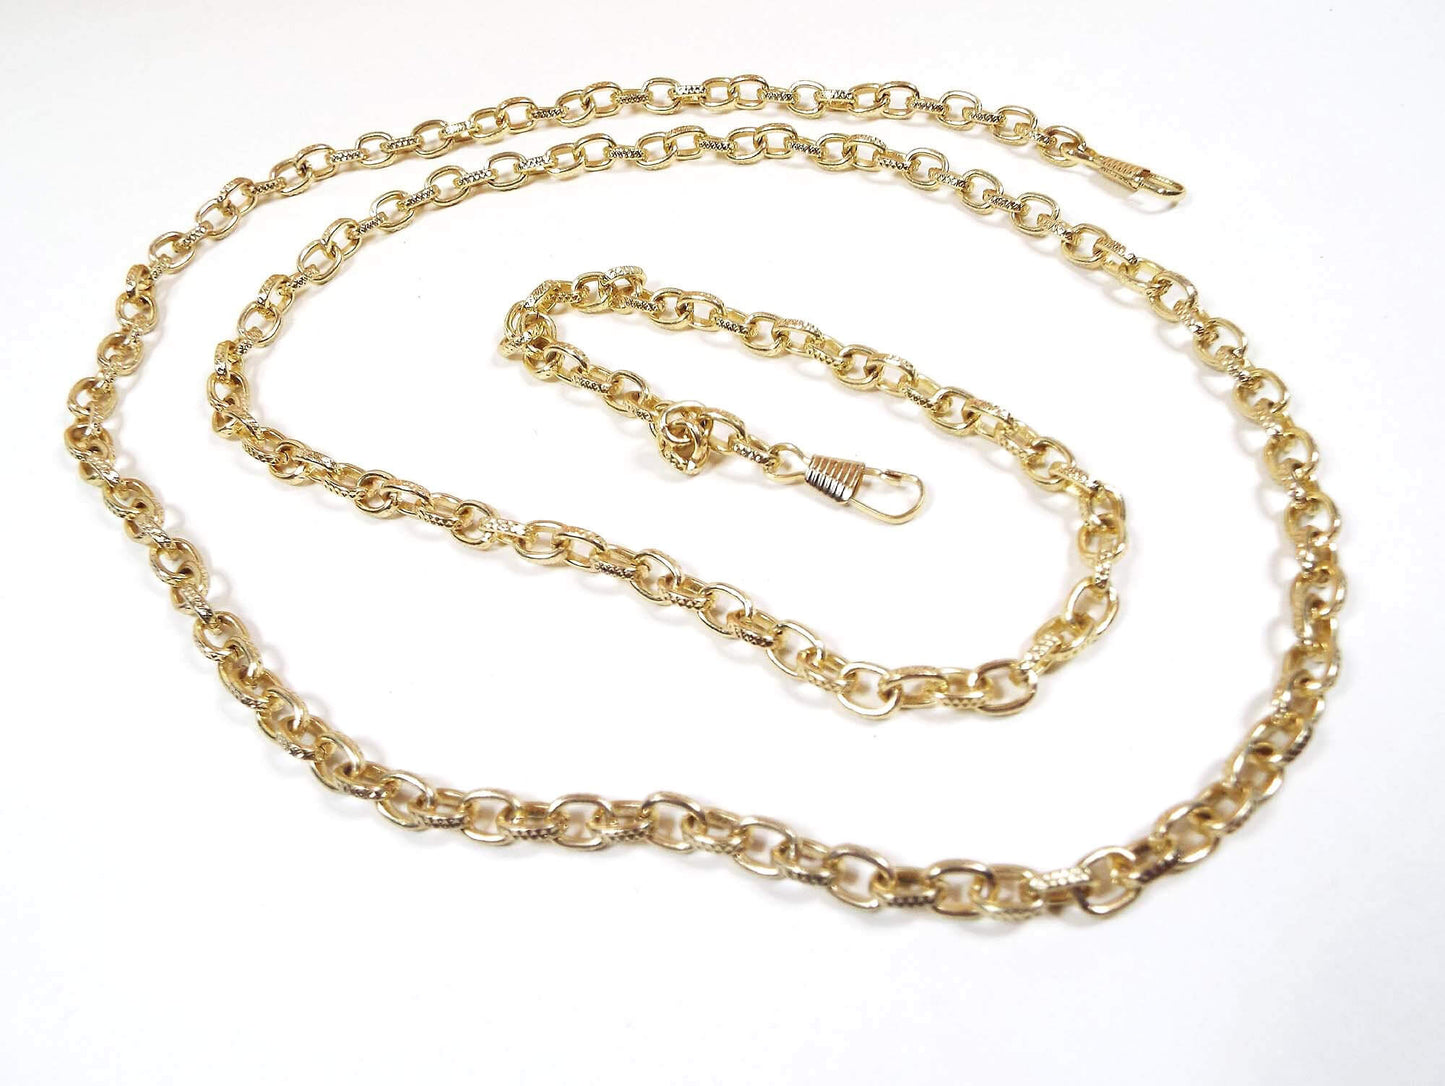 Long Retro Vintage Gold Tone Textured Fob or Vest Chain